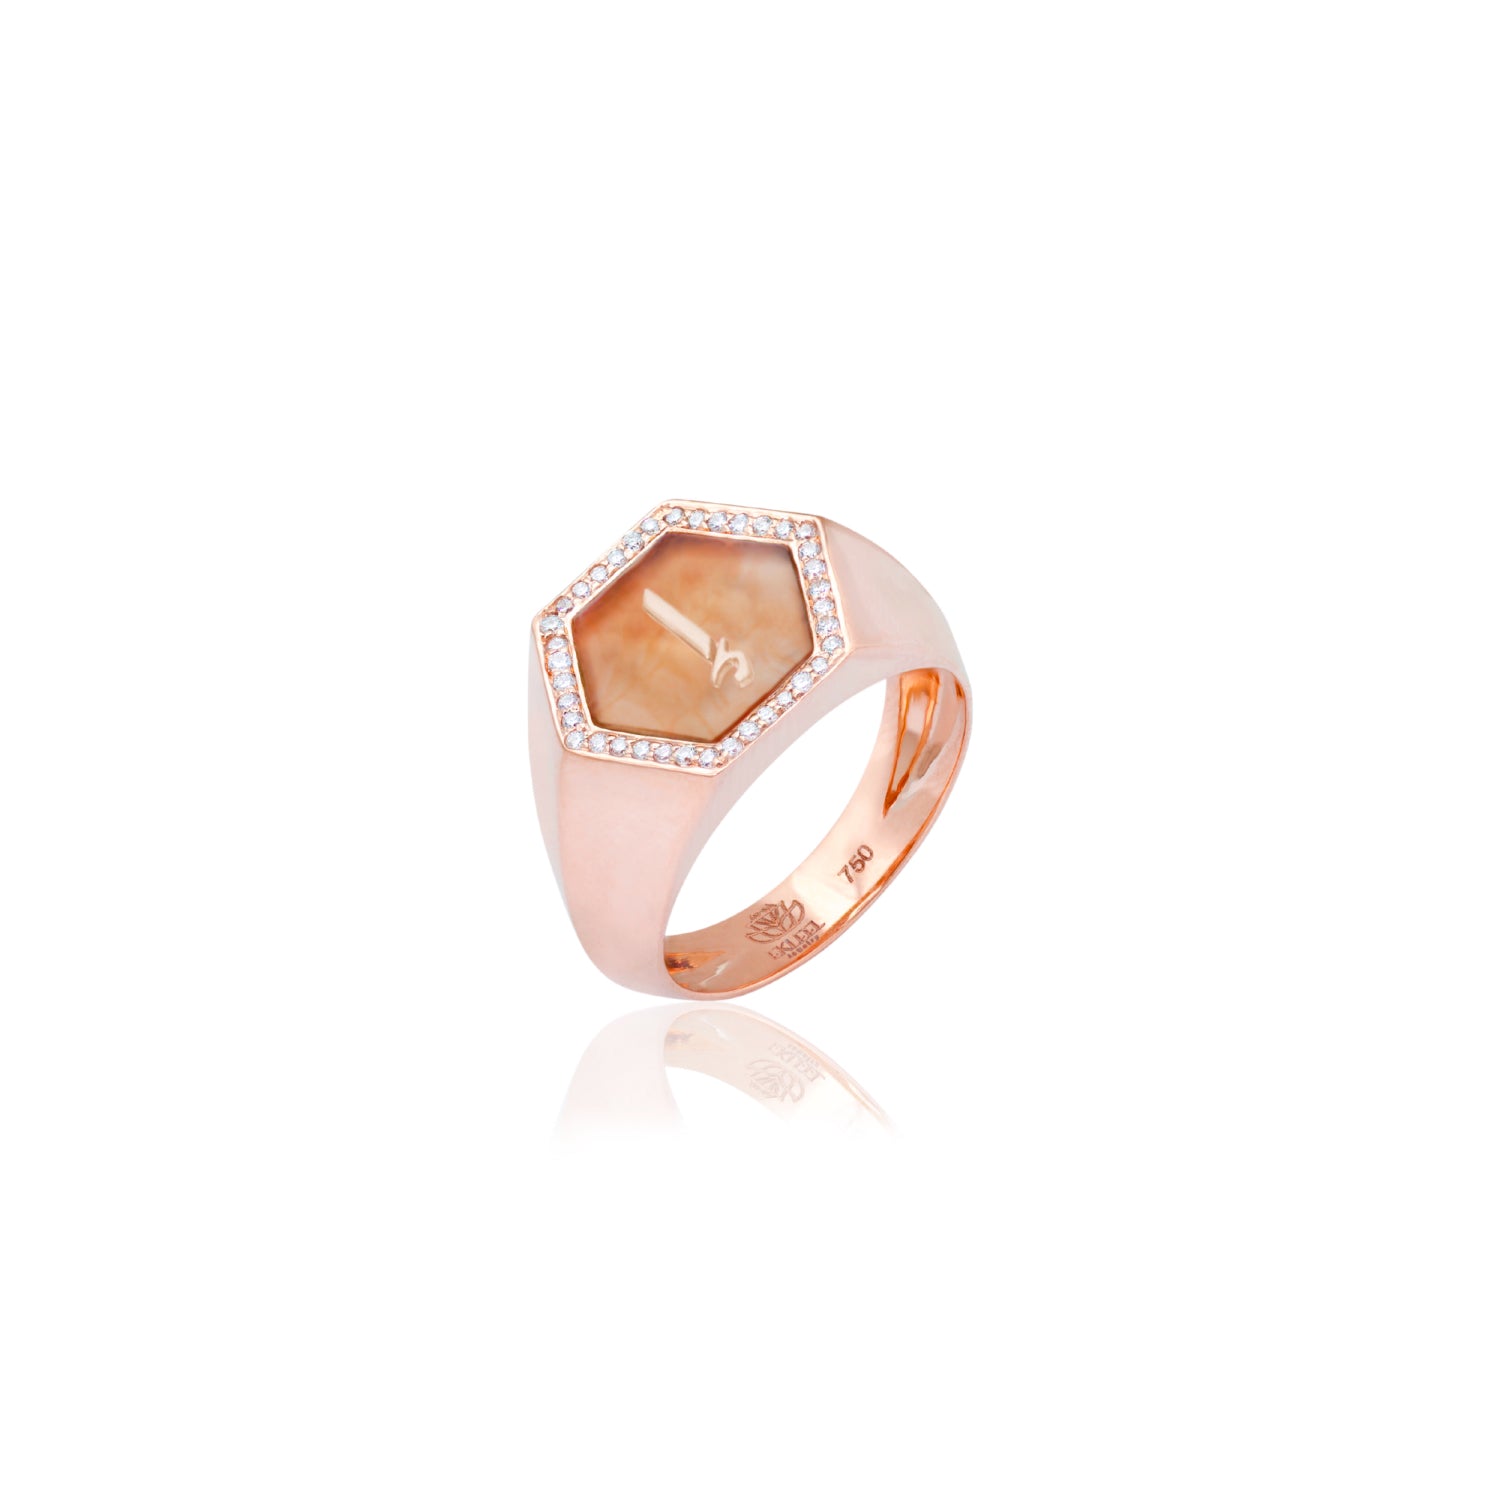 Qamoos 2.0 Letter إ Carnelian and Diamond Signet Ring in Rose Gold